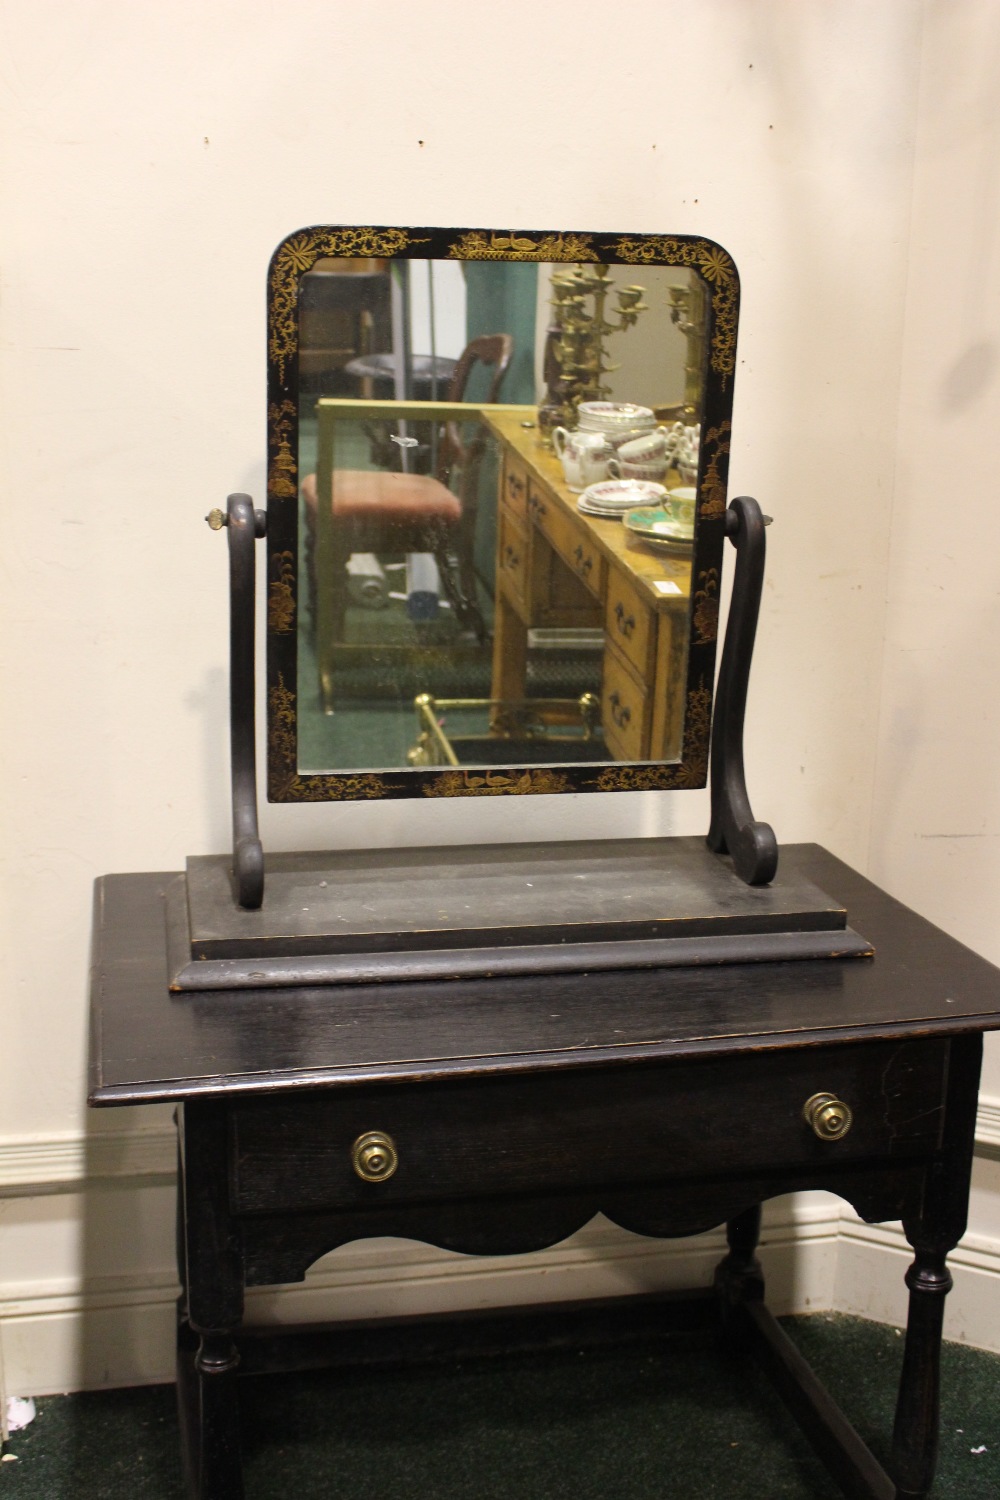 A LARGE TABLETOP SWING MIRROR / DRESSING MIRROR, in the Chinoiserie style, with gilt imagery of